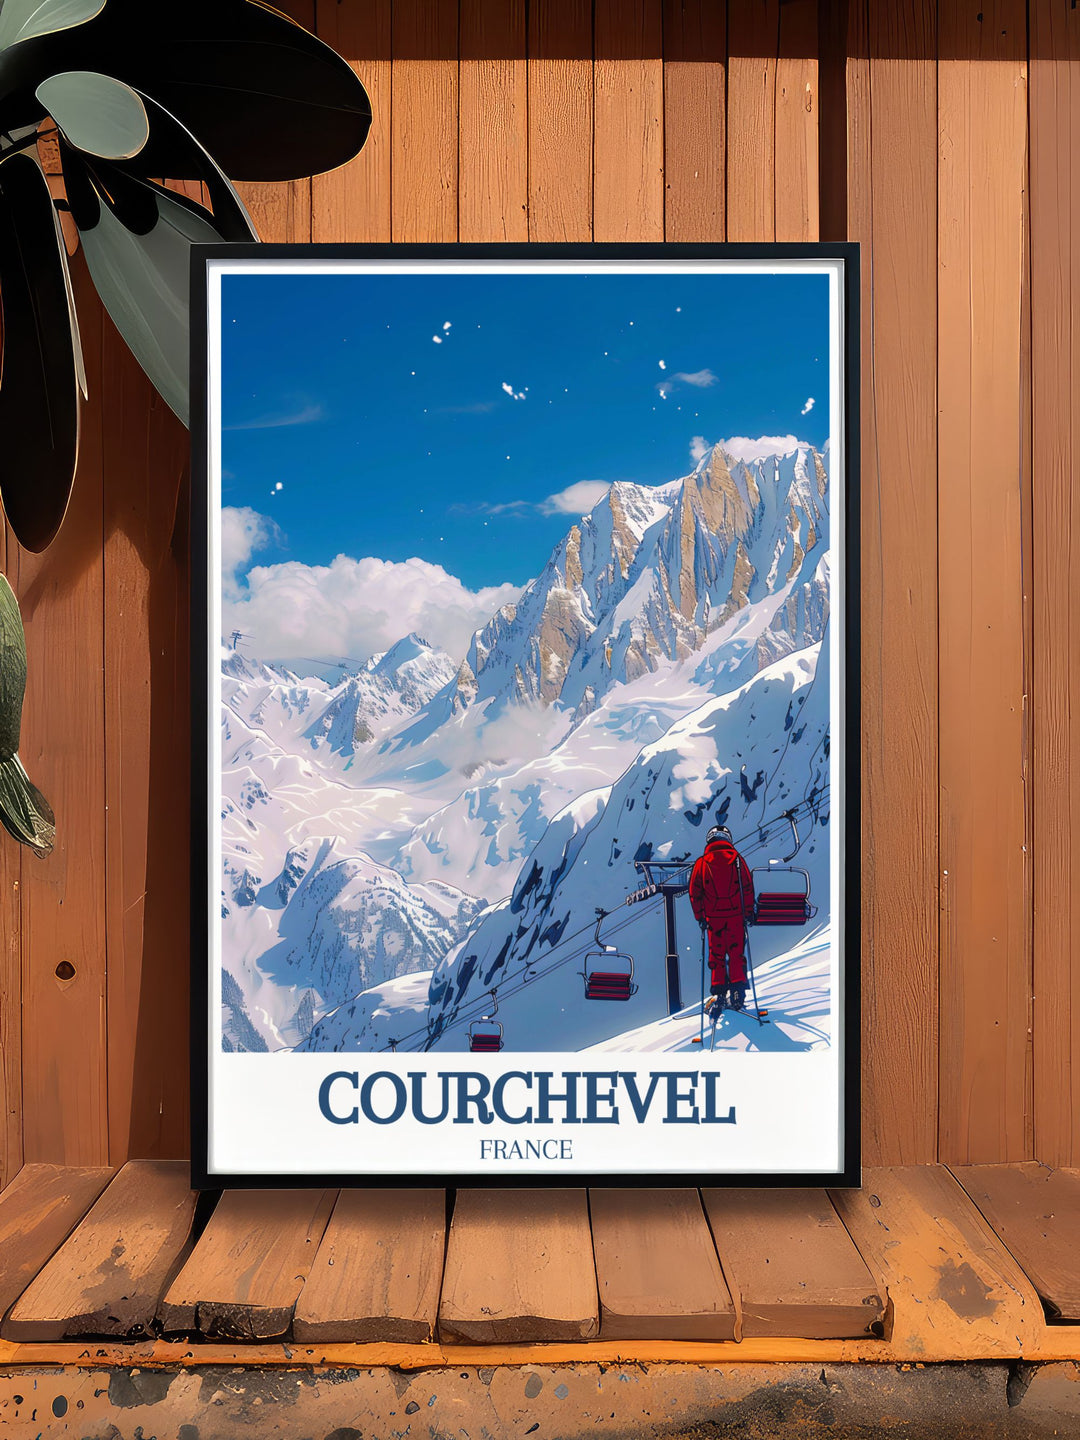 a poster of a skier on a snowy mountain